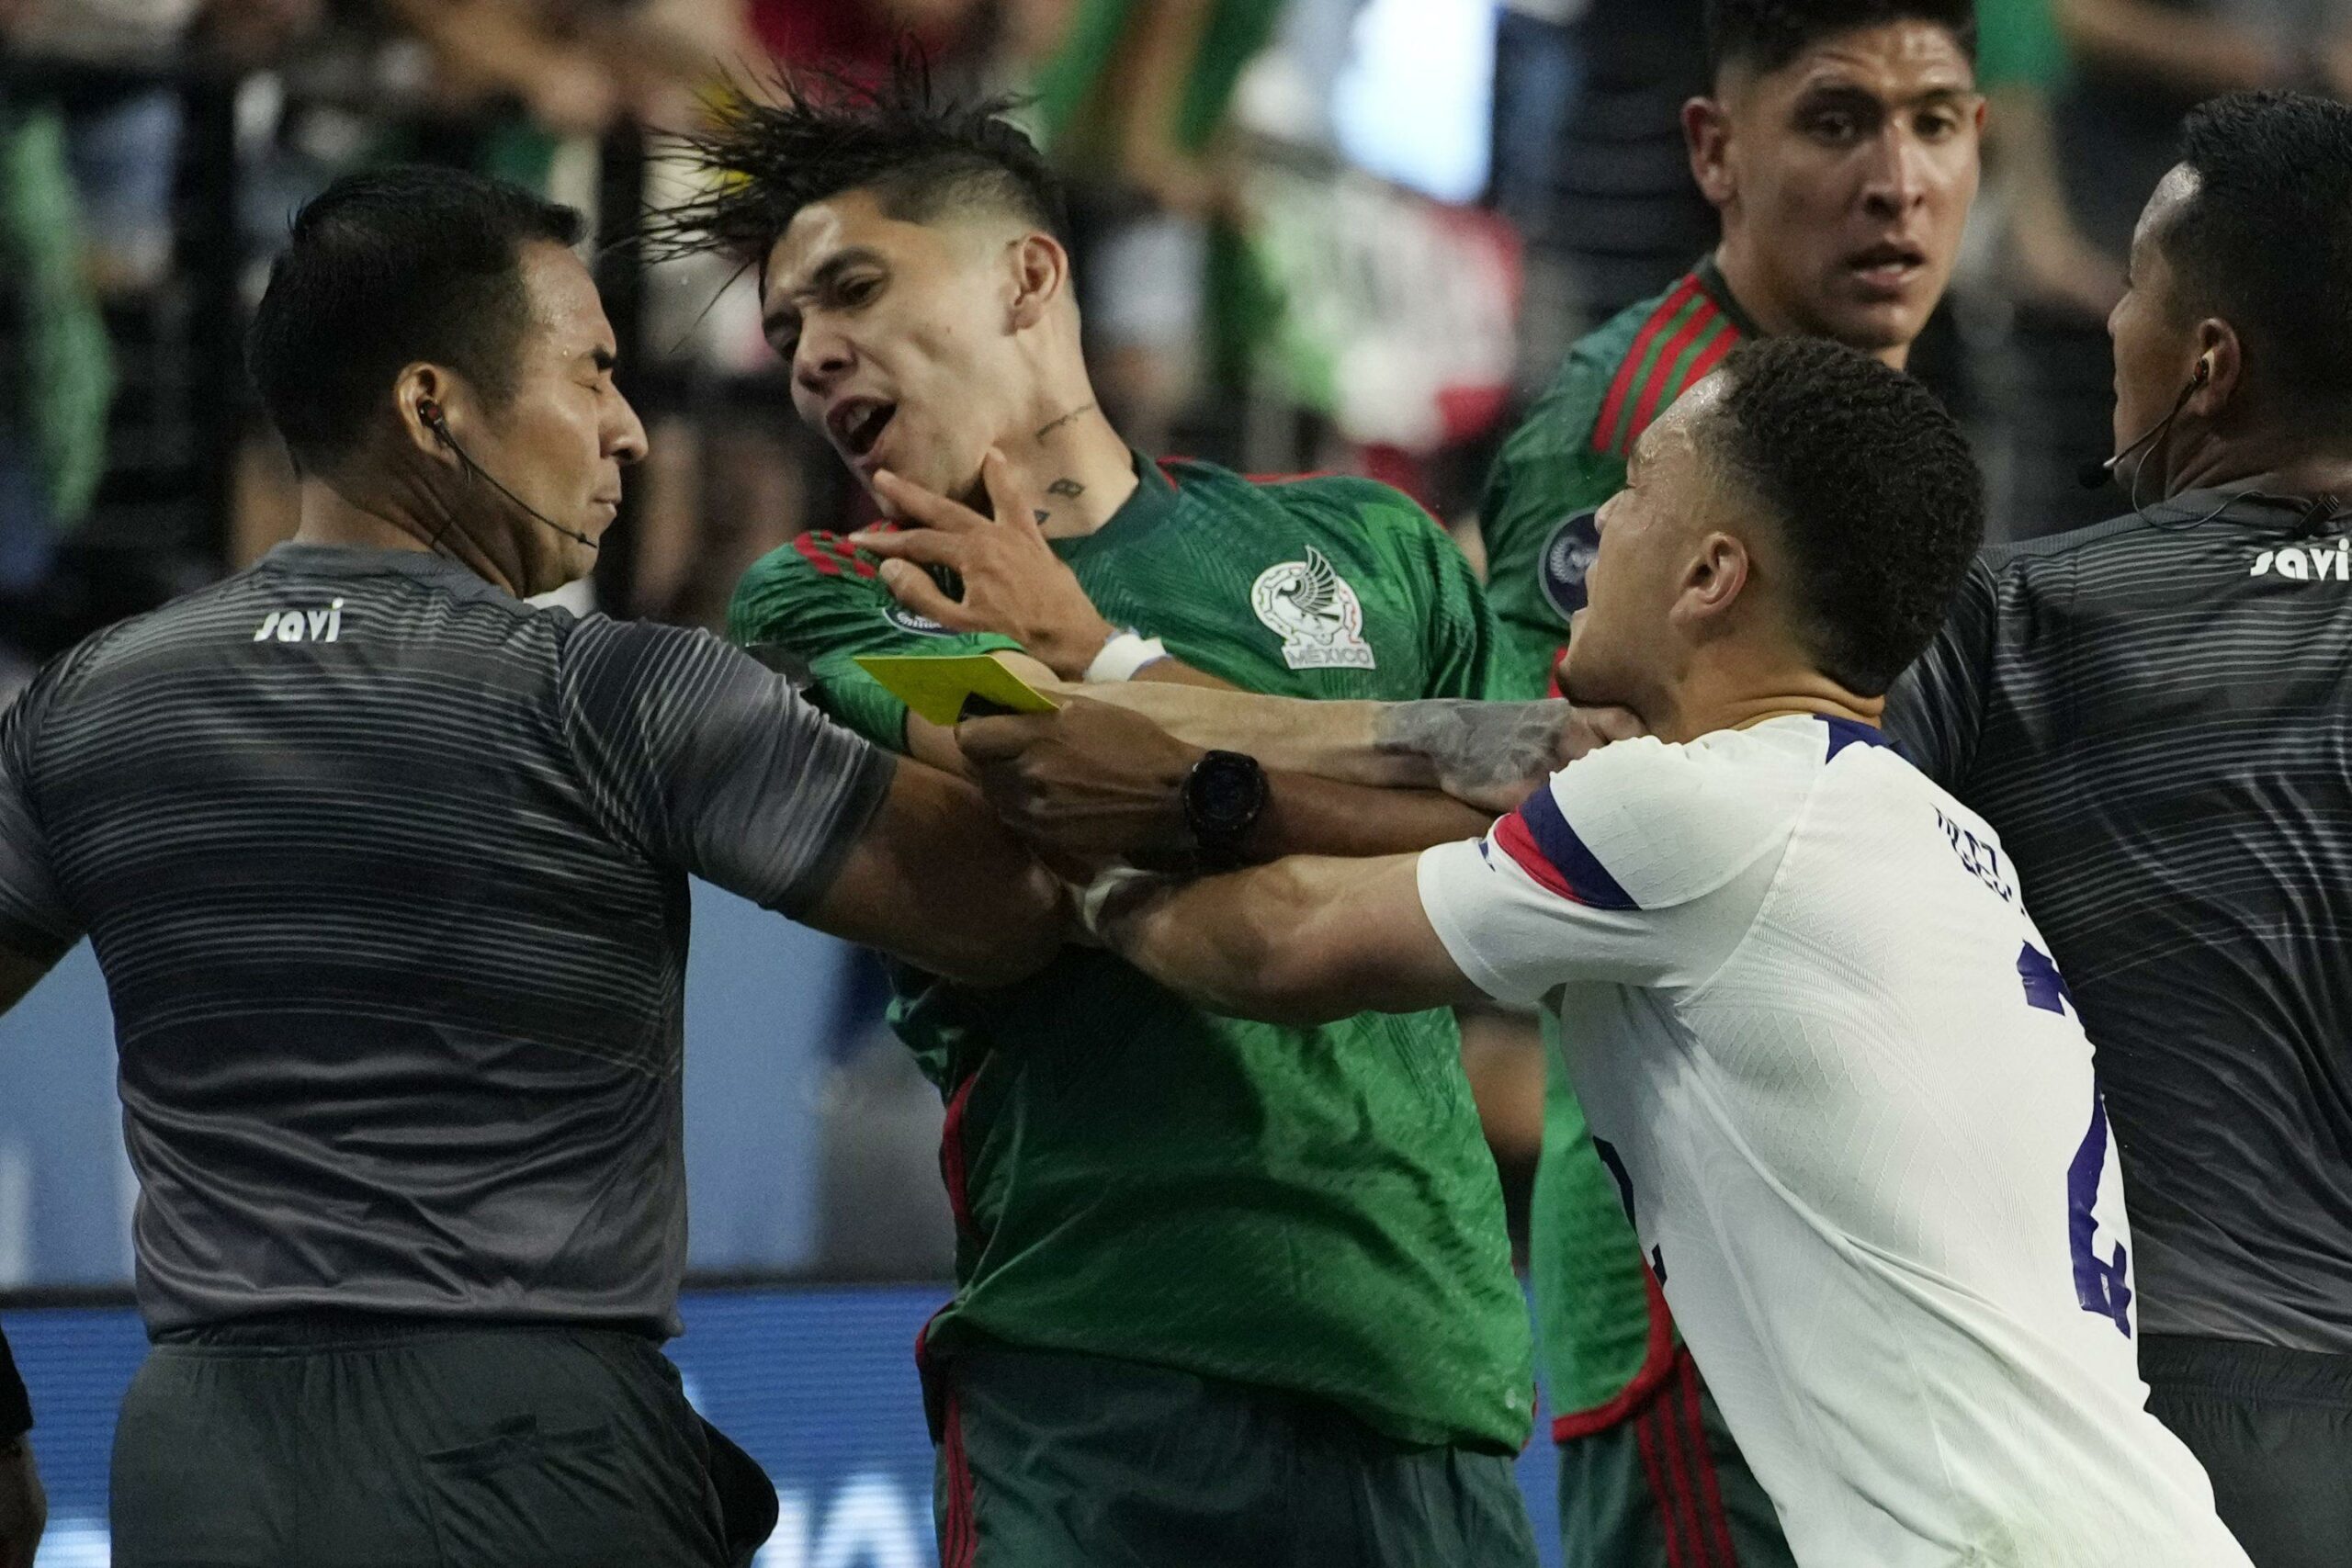 Heated U.S. vs. Mexico Game Ends Amidst Ejections and Homophobic Chants